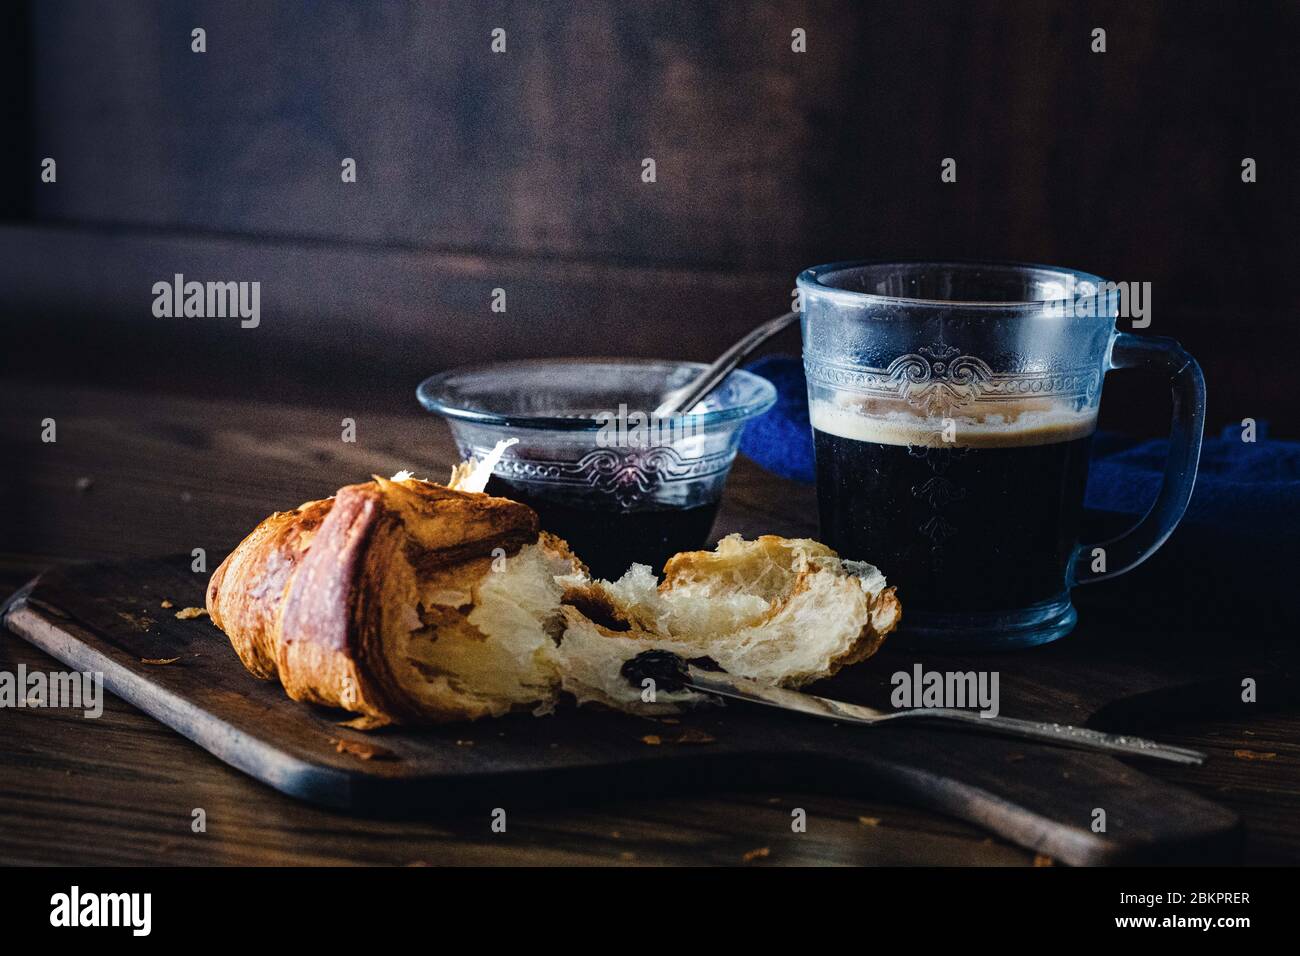 Breakfast of coffee and croissant and jam, with a dark background Stock Photo